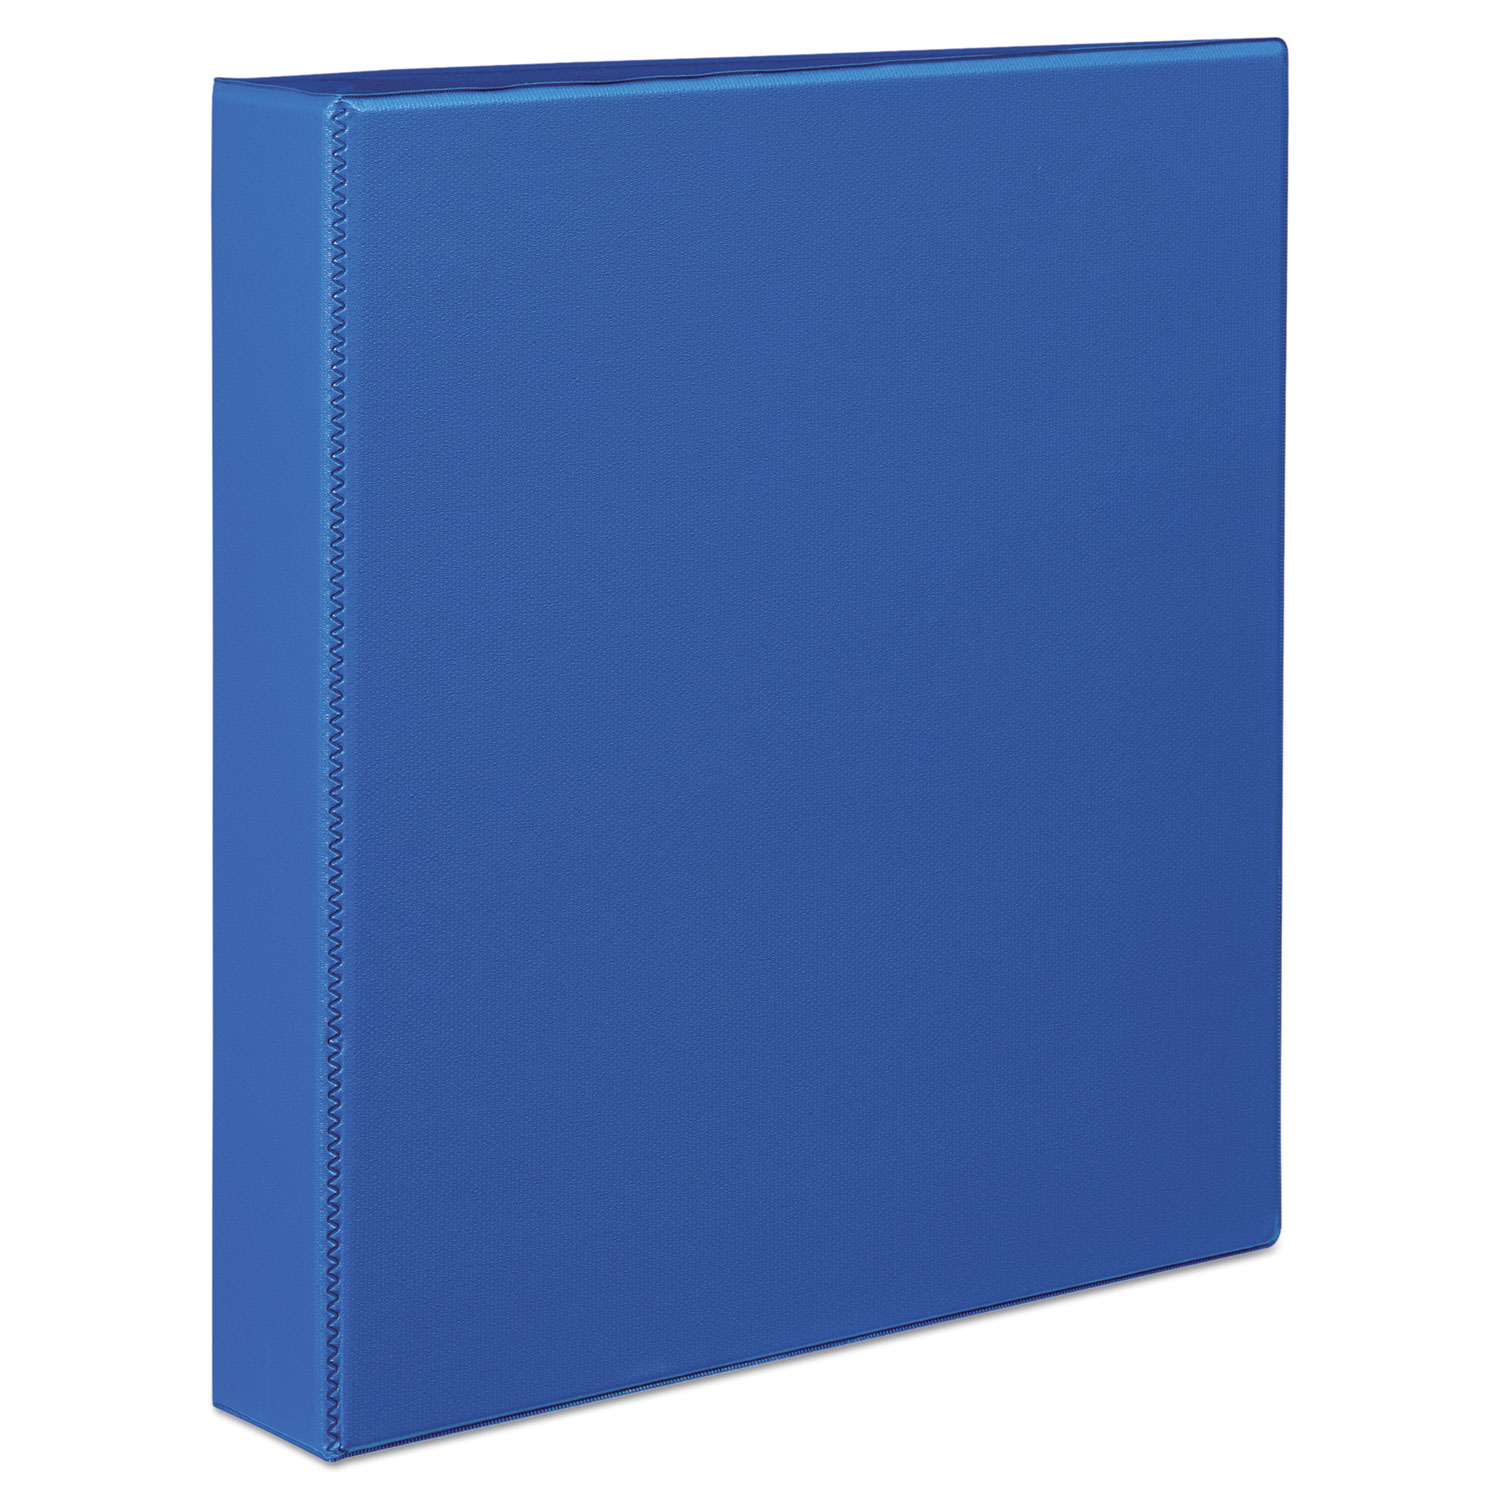 Durable Binder with Two Booster EZD Rings, 11 x 8 1/2, 1 1/2, Blue